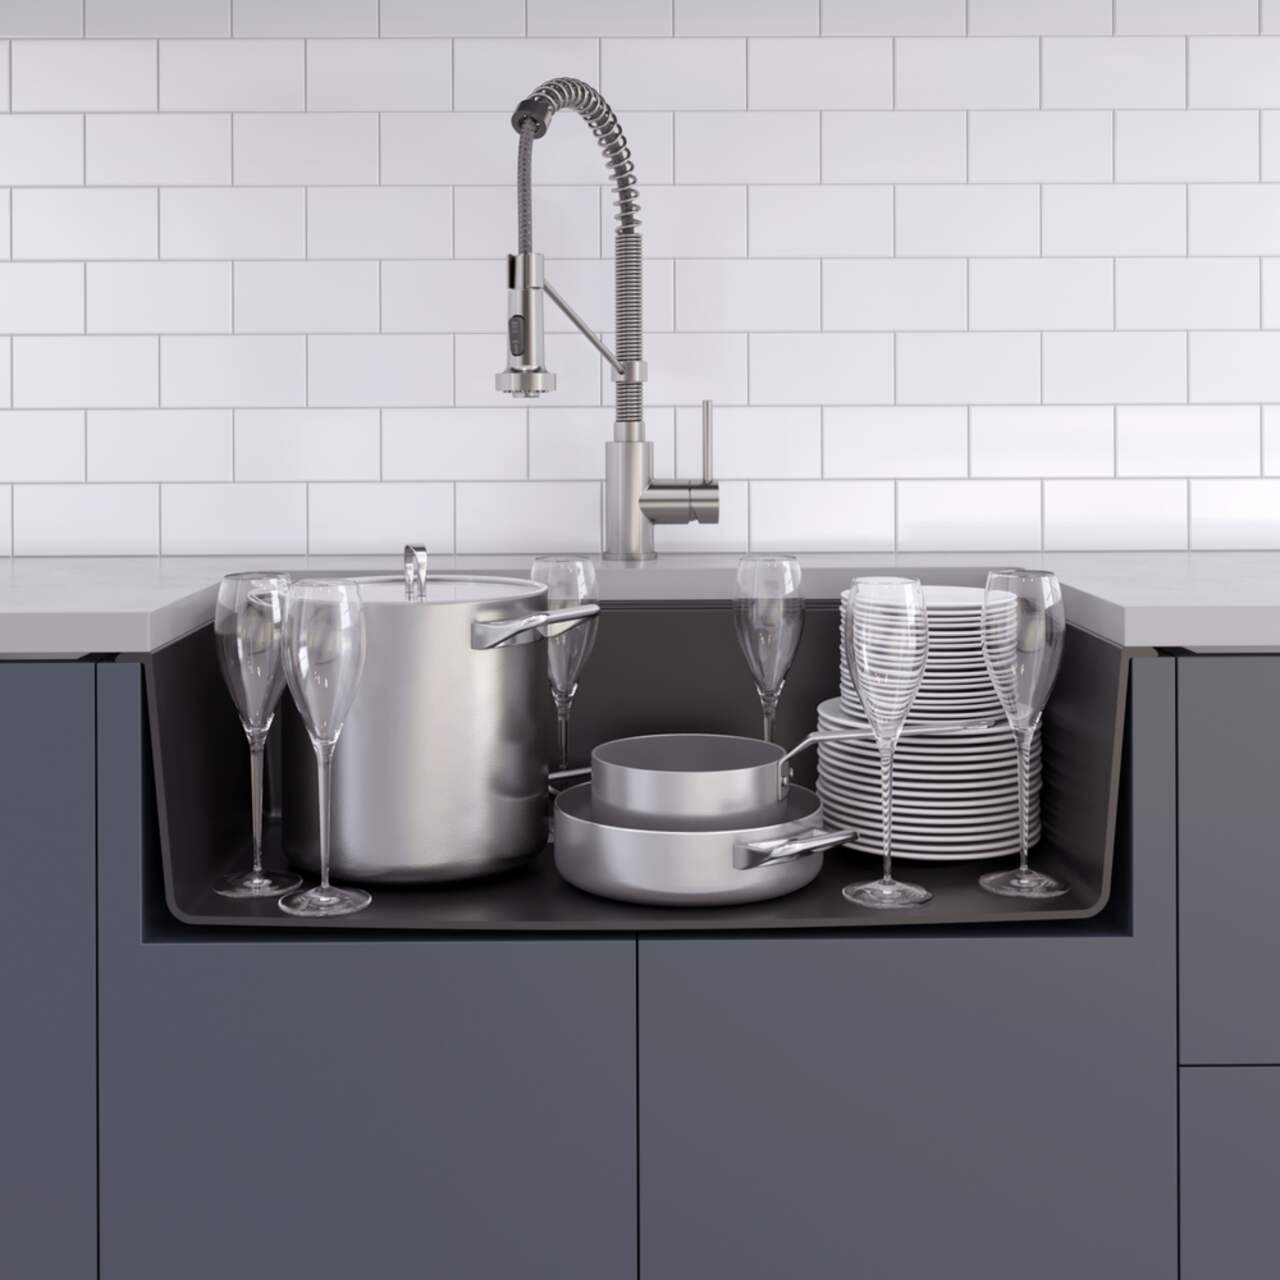 https://media-www.canadiantire.ca/product/fixing/plumbing/faucets-fixtures/3742251/kraus-31-in-single-bowl-u-mount-kitchen-sink-black-onyx-f3cbfd7b-349a-4994-ba3a-04e98c45e34a.png?imdensity=1&imwidth=1244&impolicy=mZoom